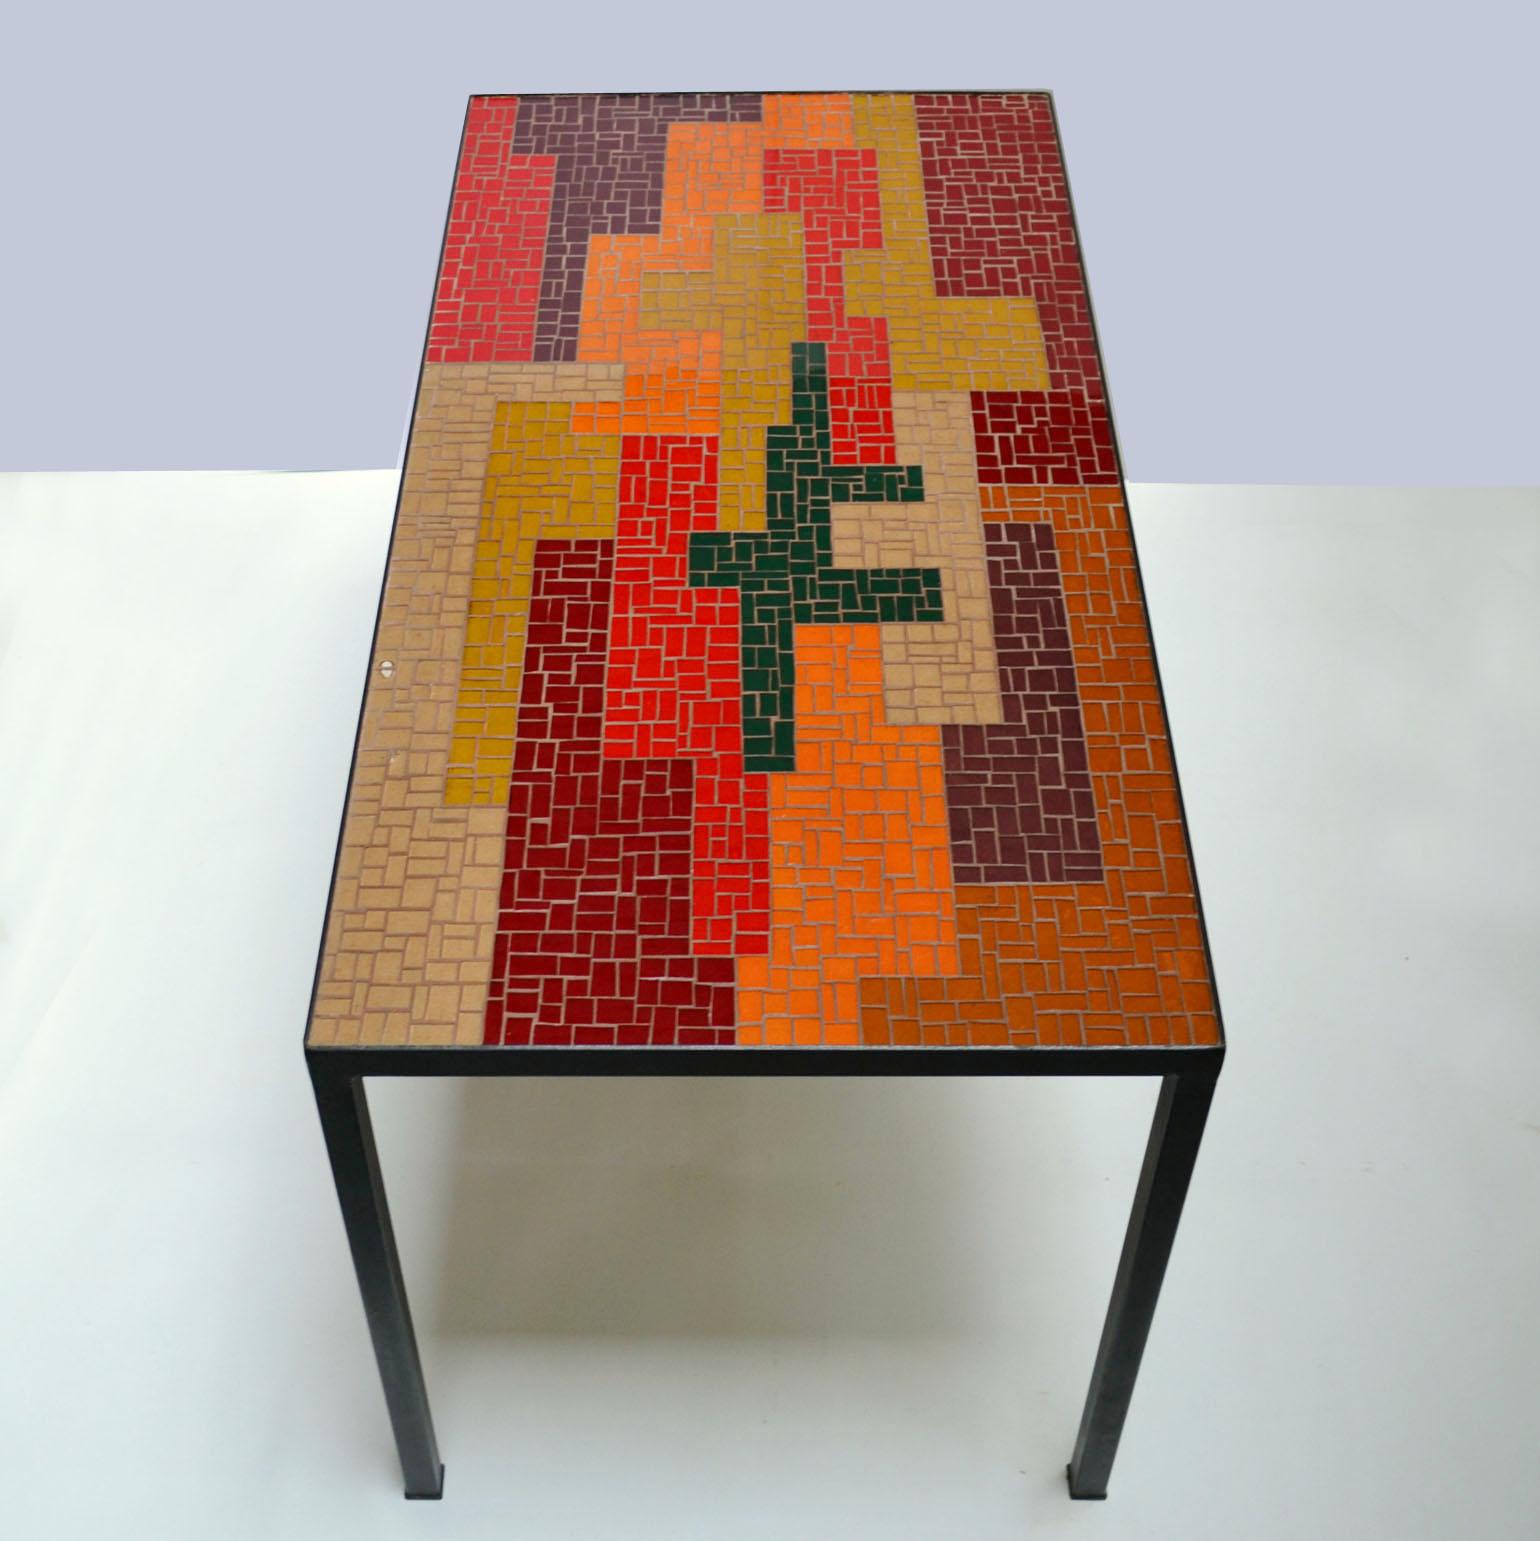 Mosaic coffee table with strong abstract design a well balanced palate in black, red, orange salmon and ochre pieces of rectangular and square pieces of glass creating a striking pattern in horizontal and vertical directions. The elegant frame is in